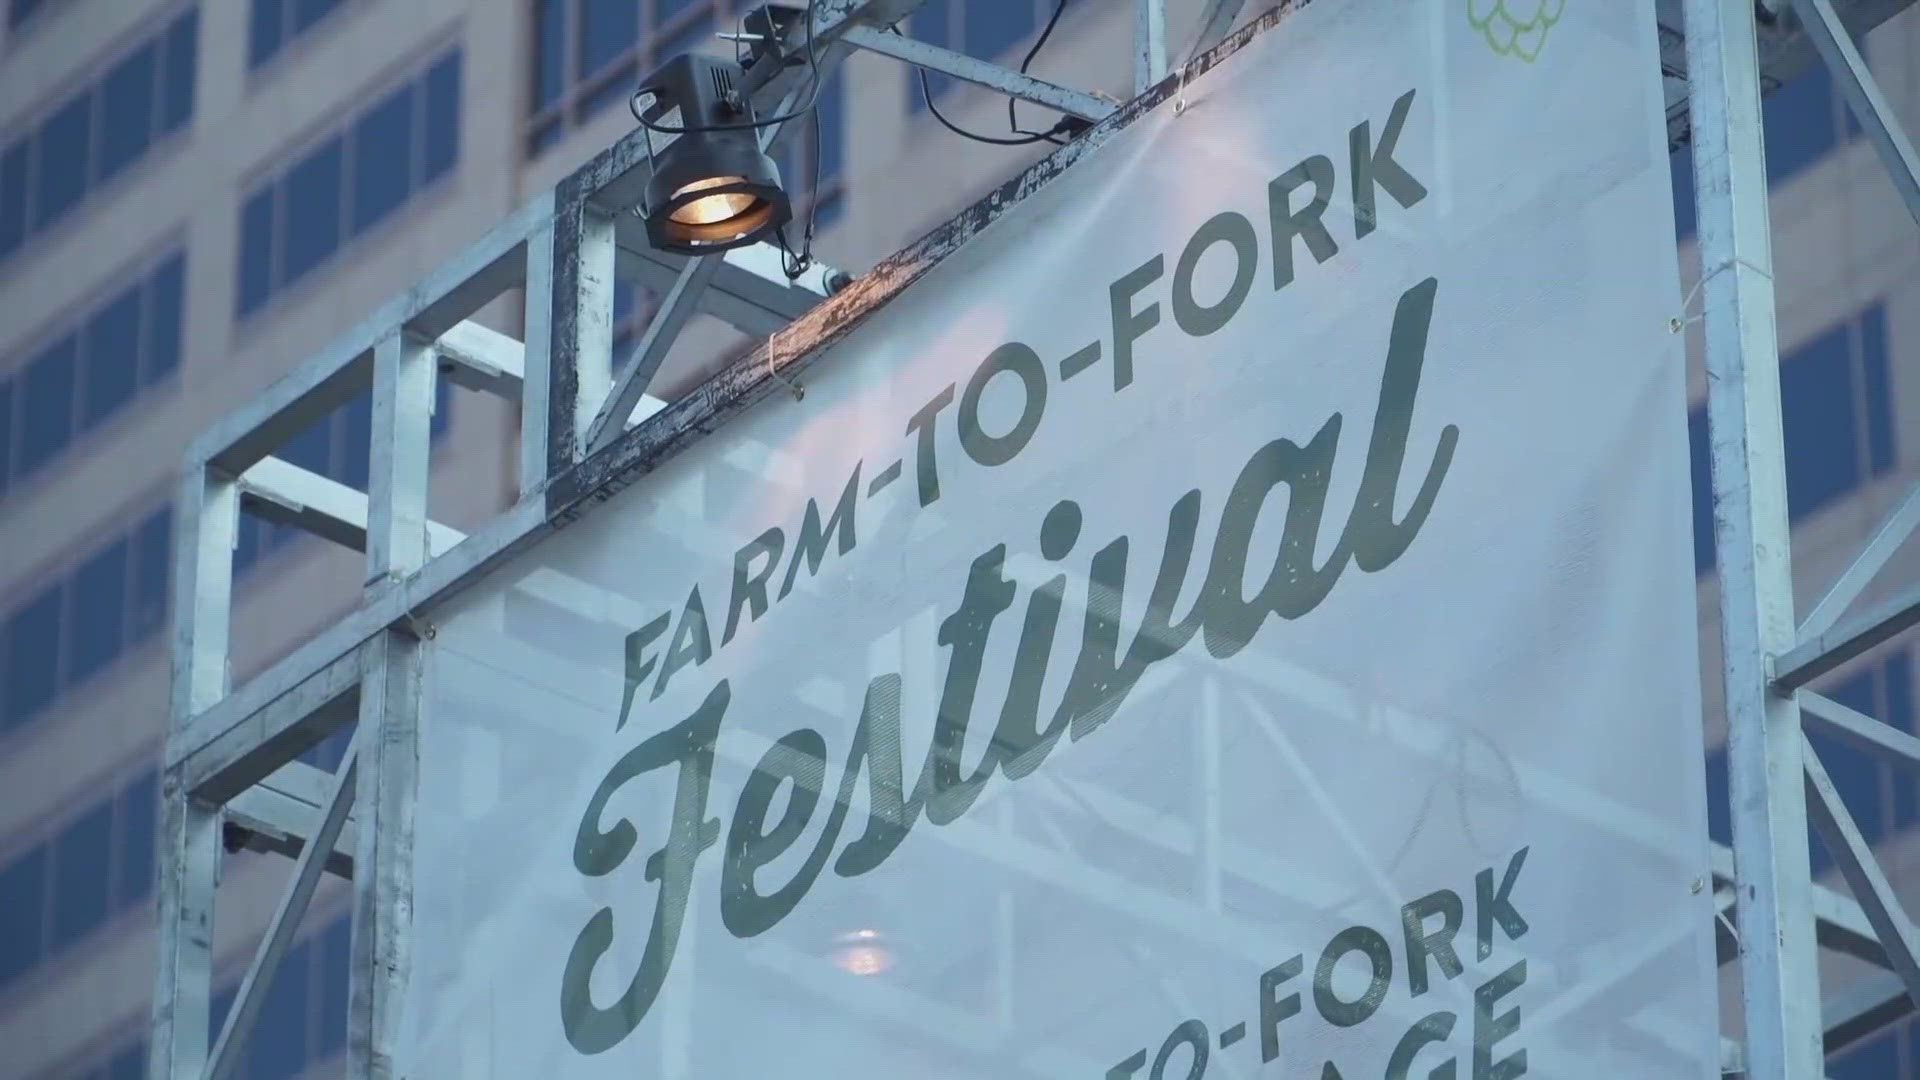 A look at the 'Farm to Fork' Festival